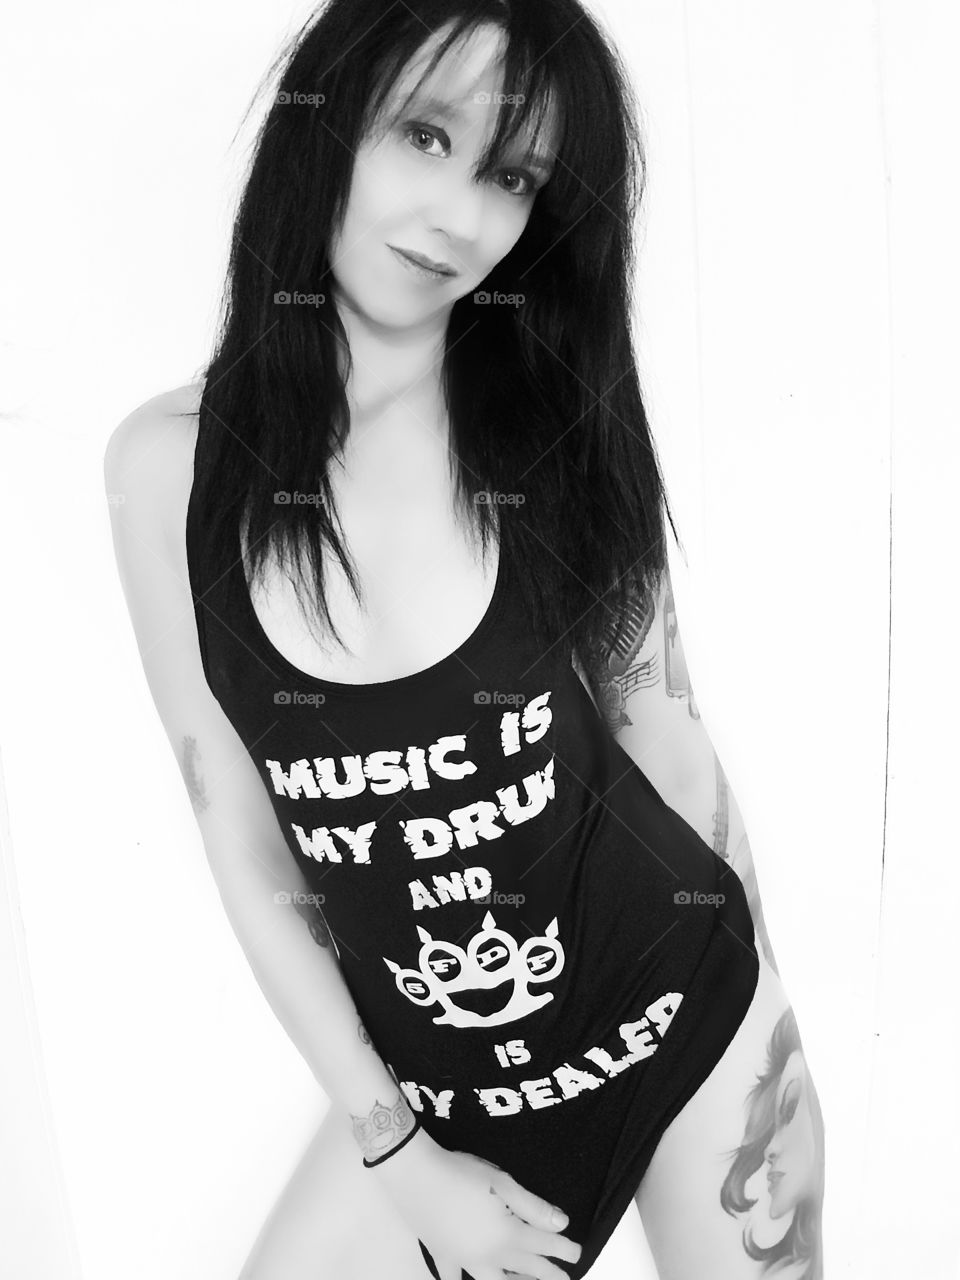 Supporting the metal music
She wears it well
Ivy the metal chick